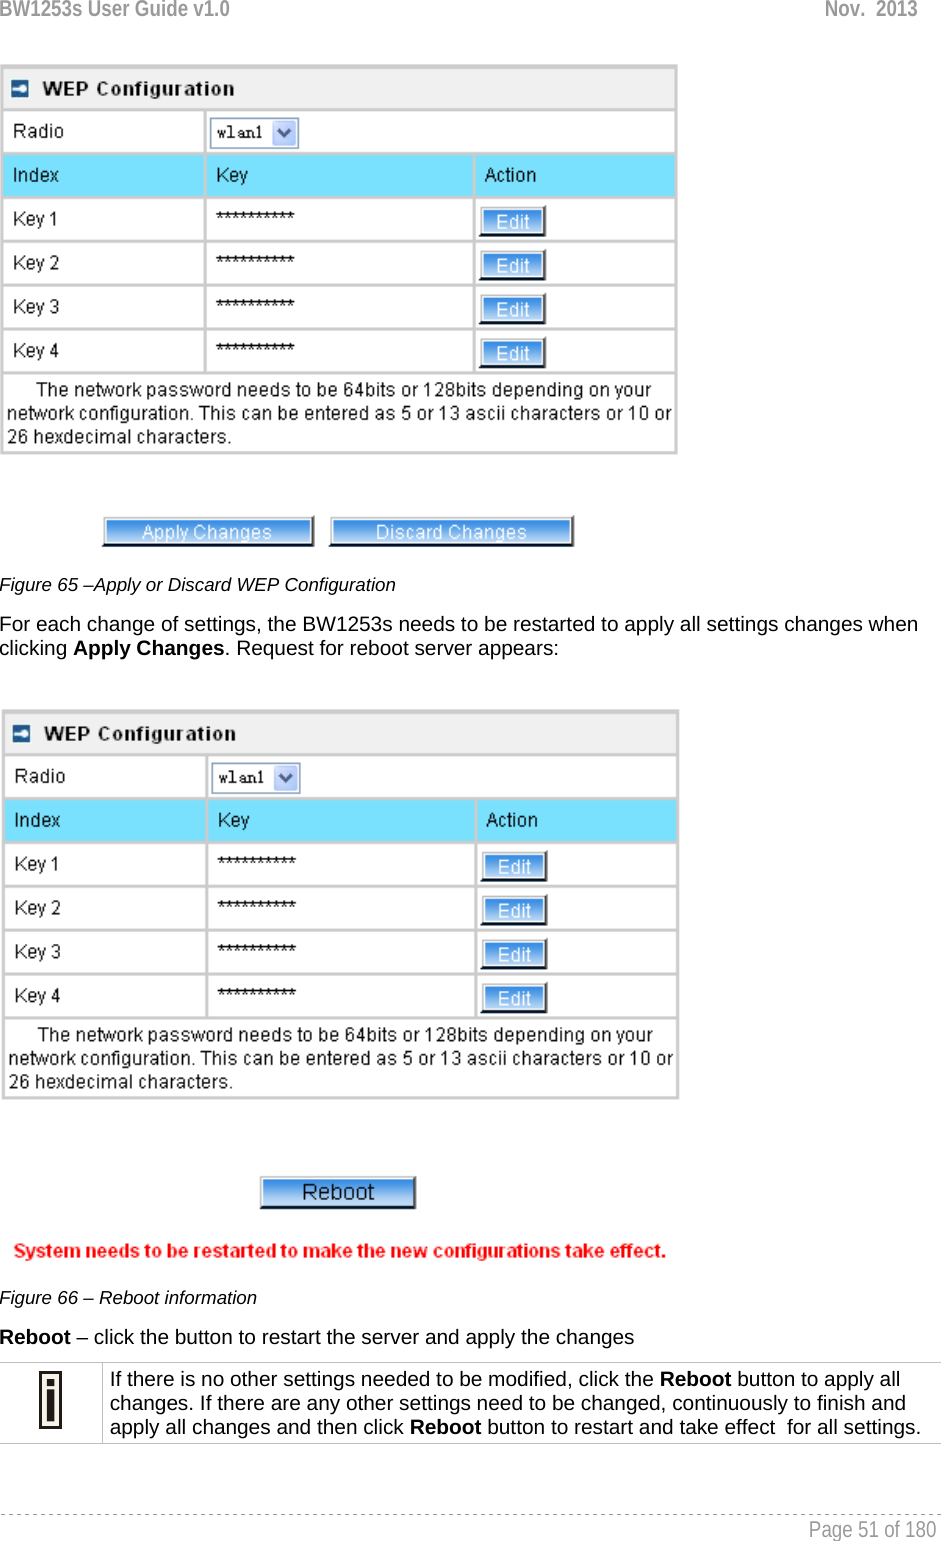 BW1253s User Guide v1.0  Nov.  2013     Page 51 of 180    Figure 65 –Apply or Discard WEP Configuration For each change of settings, the BW1253s needs to be restarted to apply all settings changes when clicking Apply Changes. Request for reboot server appears:   Figure 66 – Reboot information Reboot – click the button to restart the server and apply the changes  If there is no other settings needed to be modified, click the Reboot button to apply all changes. If there are any other settings need to be changed, continuously to finish and apply all changes and then click Reboot button to restart and take effect  for all settings.  